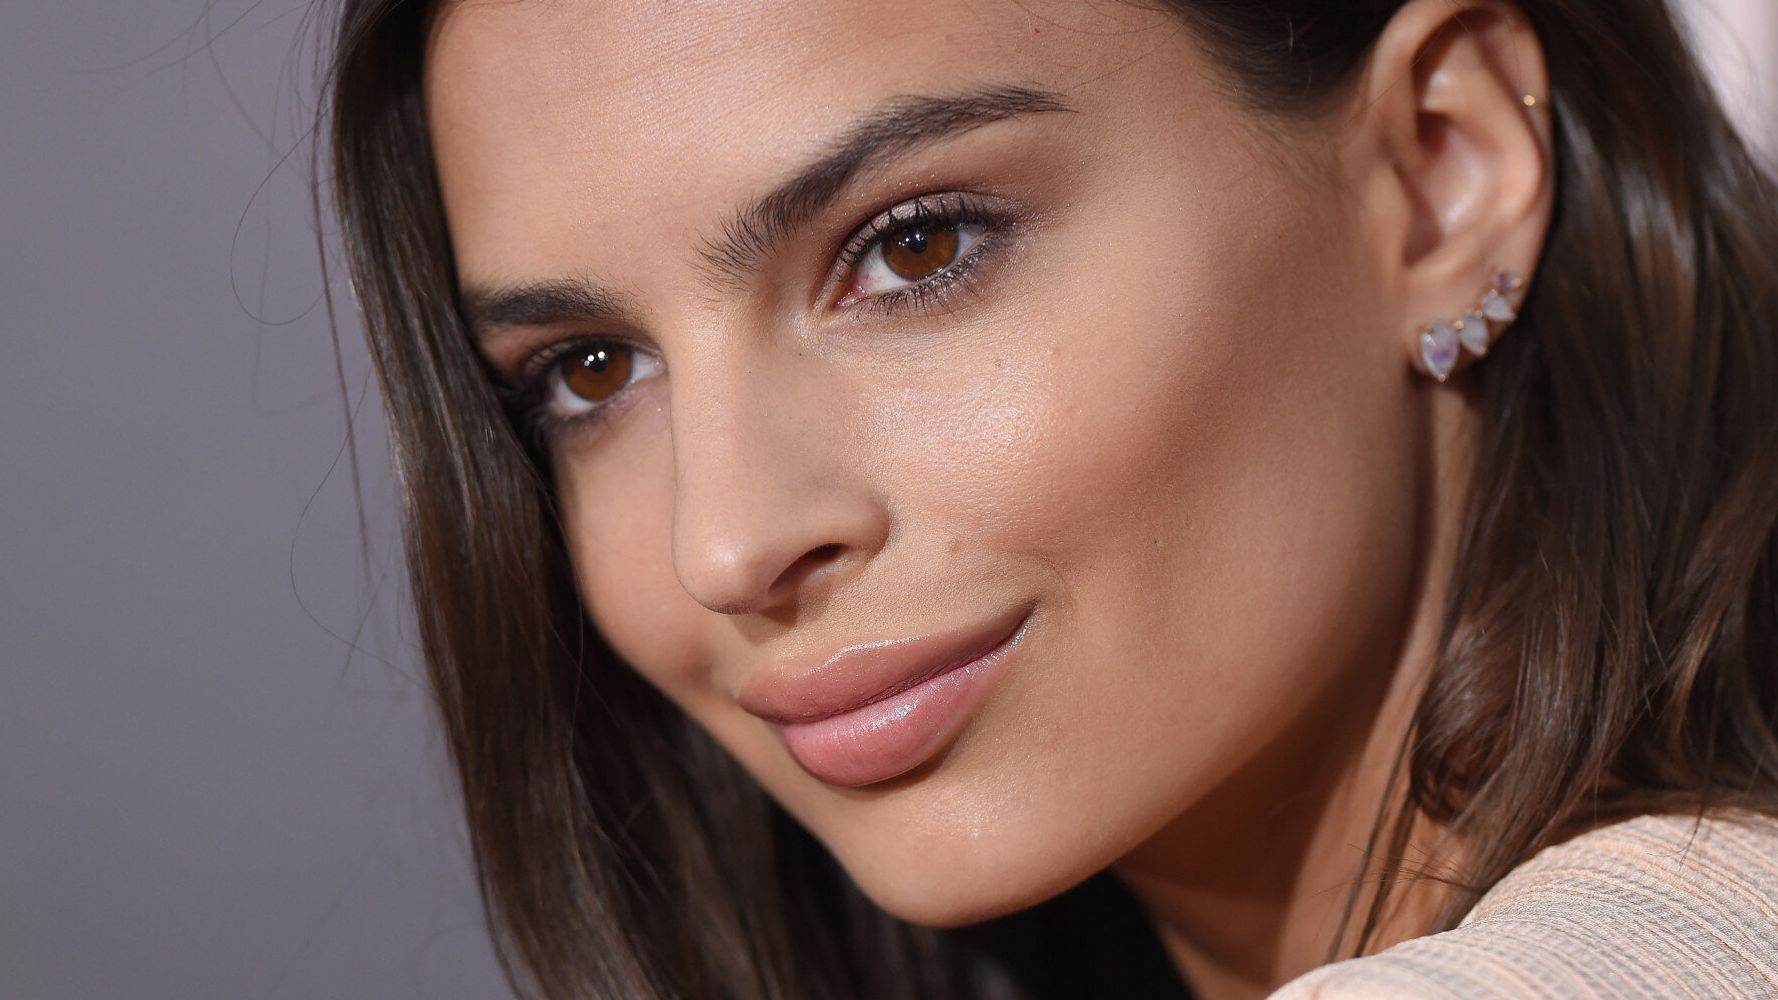 Tantouring Is The New, Semi-Permanent Way To Contour. Here's How To Do ...